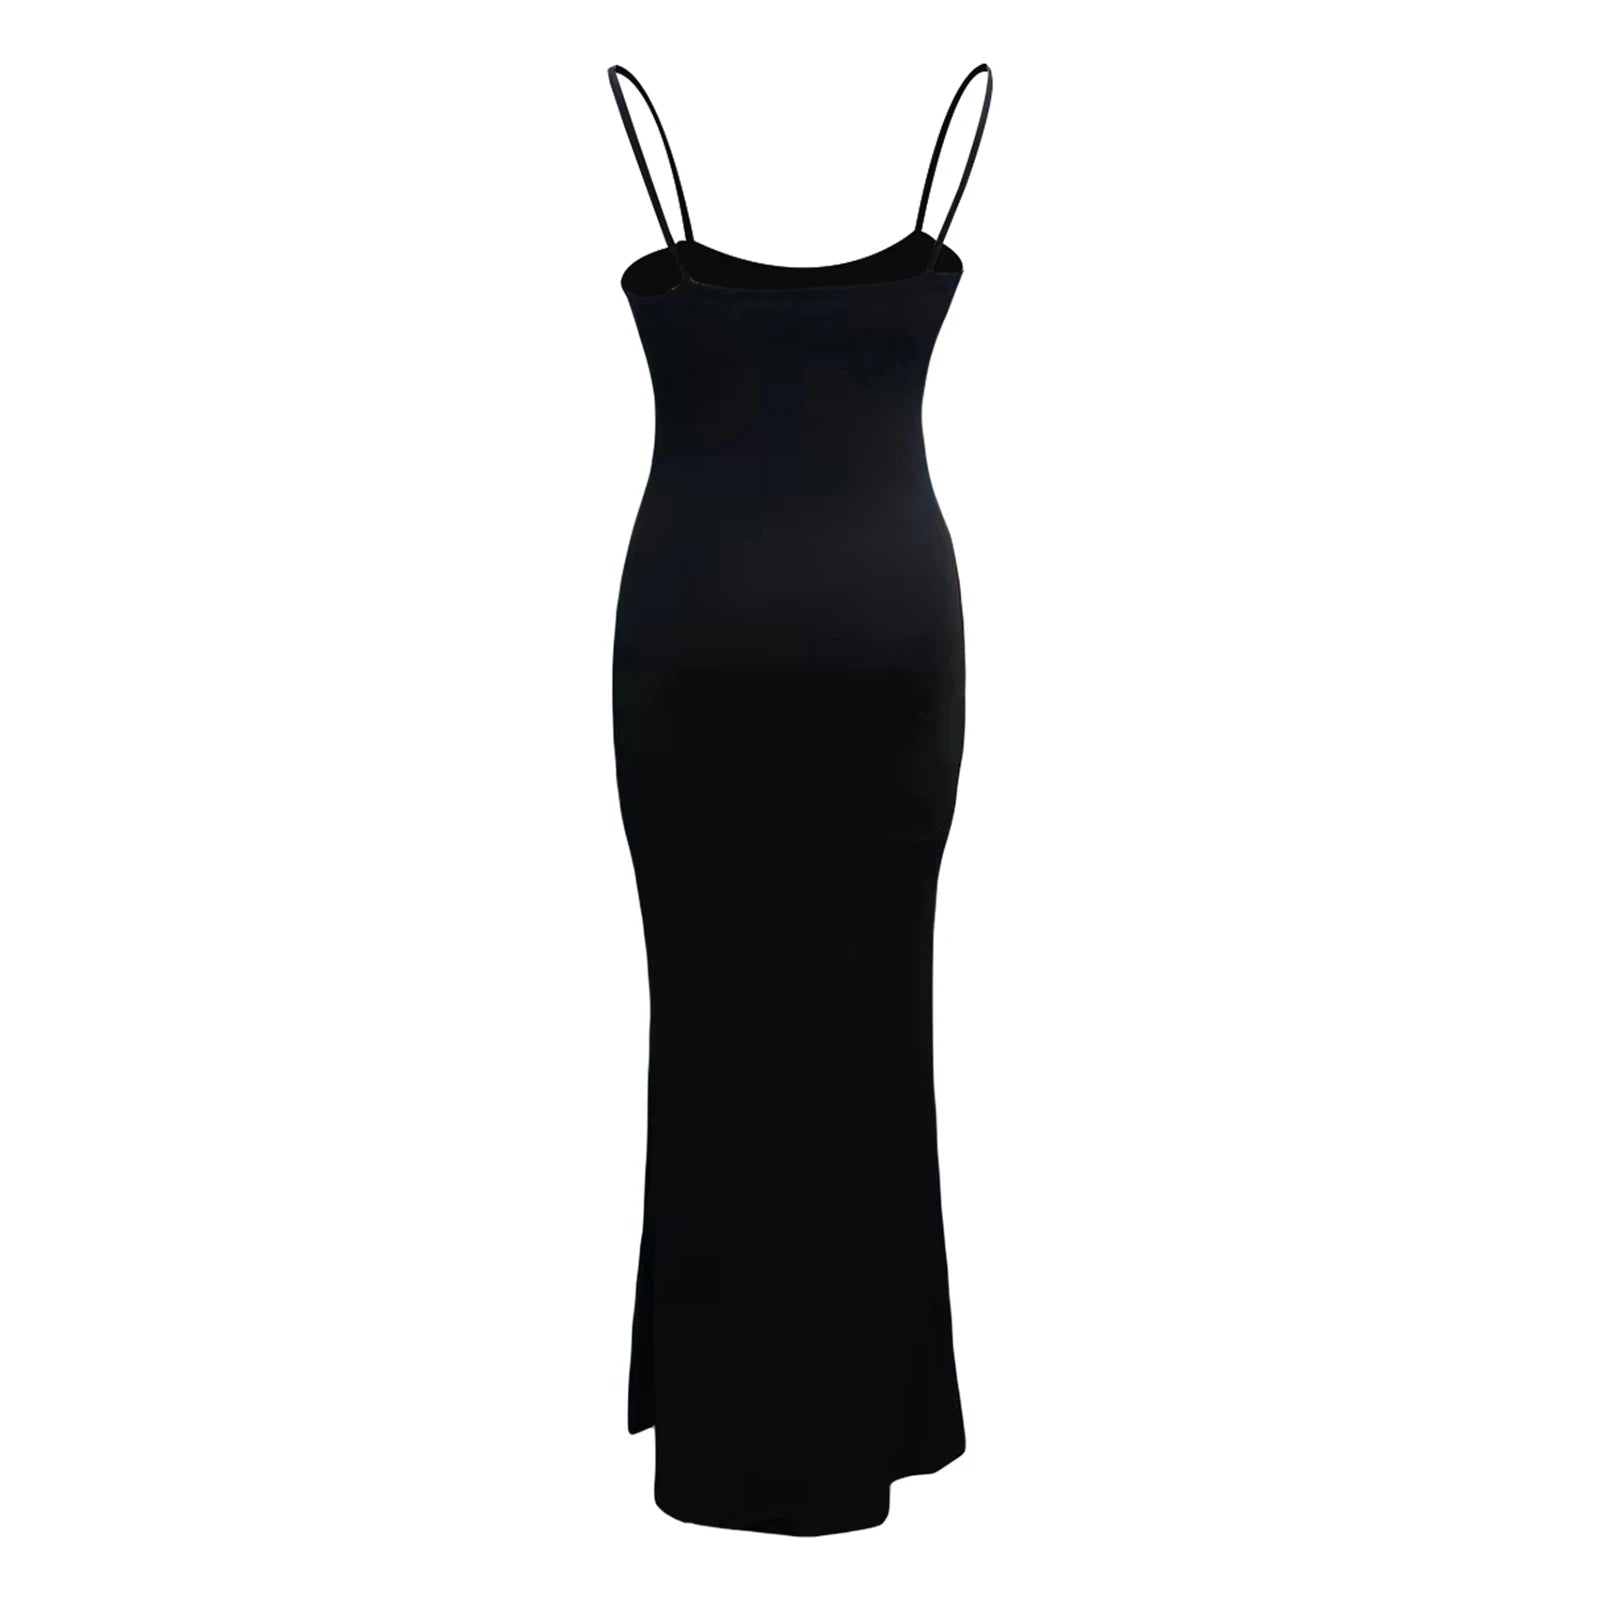 Women Sleeveless Long Bodycon Fish Tail Dresses Sexy Elegant Spaghetti Strap Solid Color Cocktail Party Dress